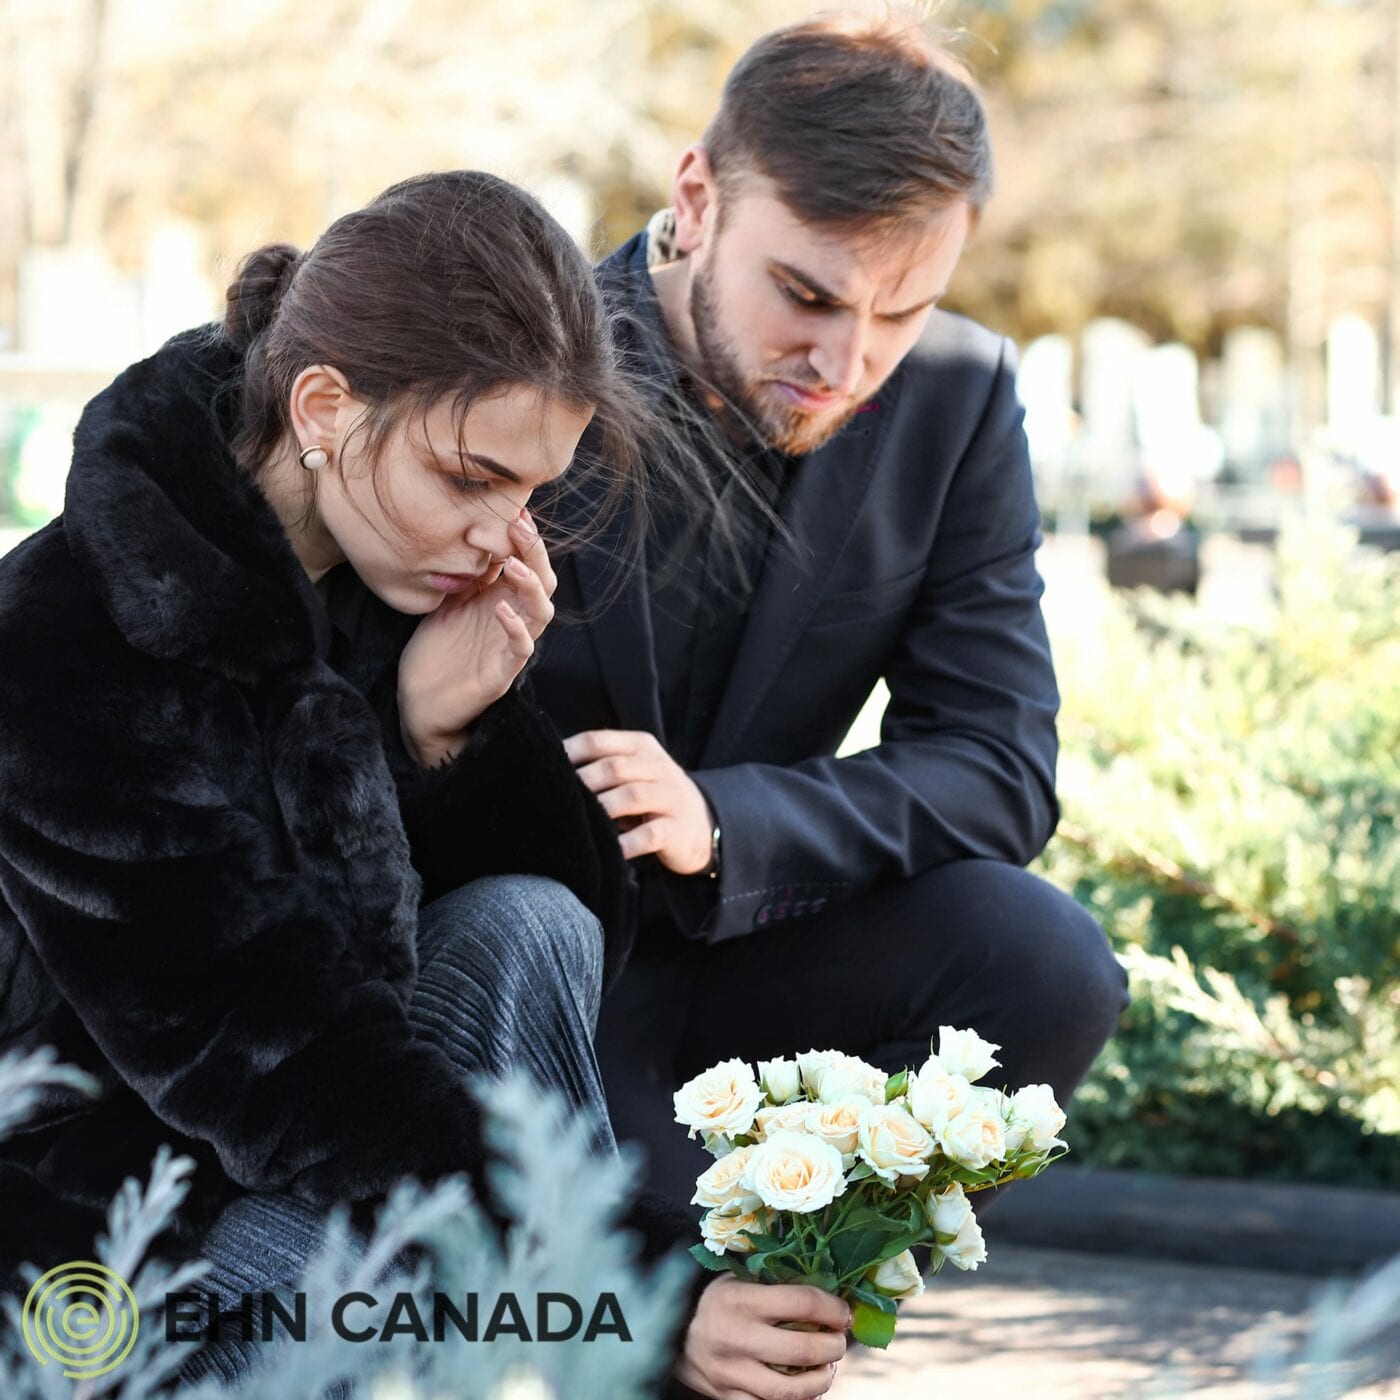 Life expectancy in Canada declining. Grieving couple at friend's funeral.